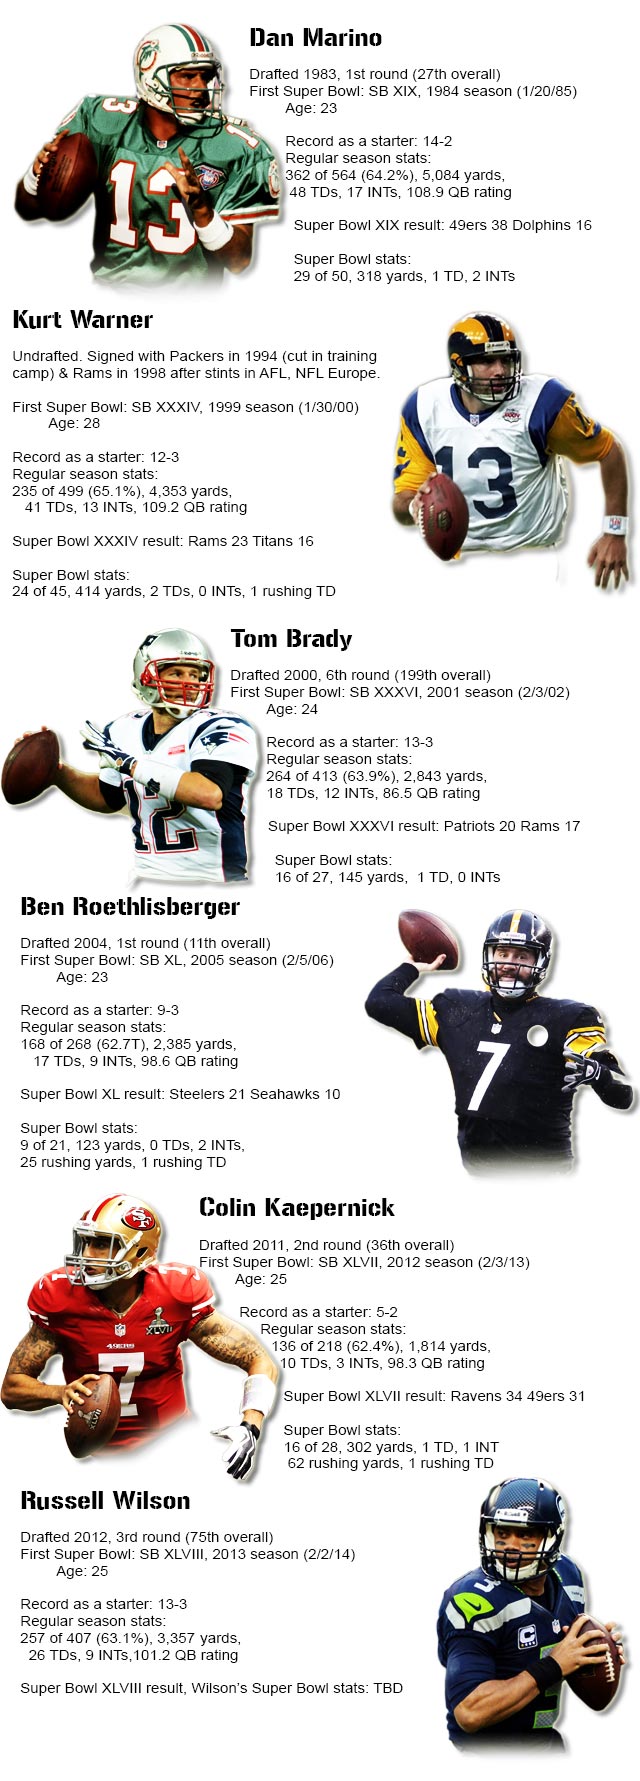 TEXT HERE. (Eye on Football infographic)